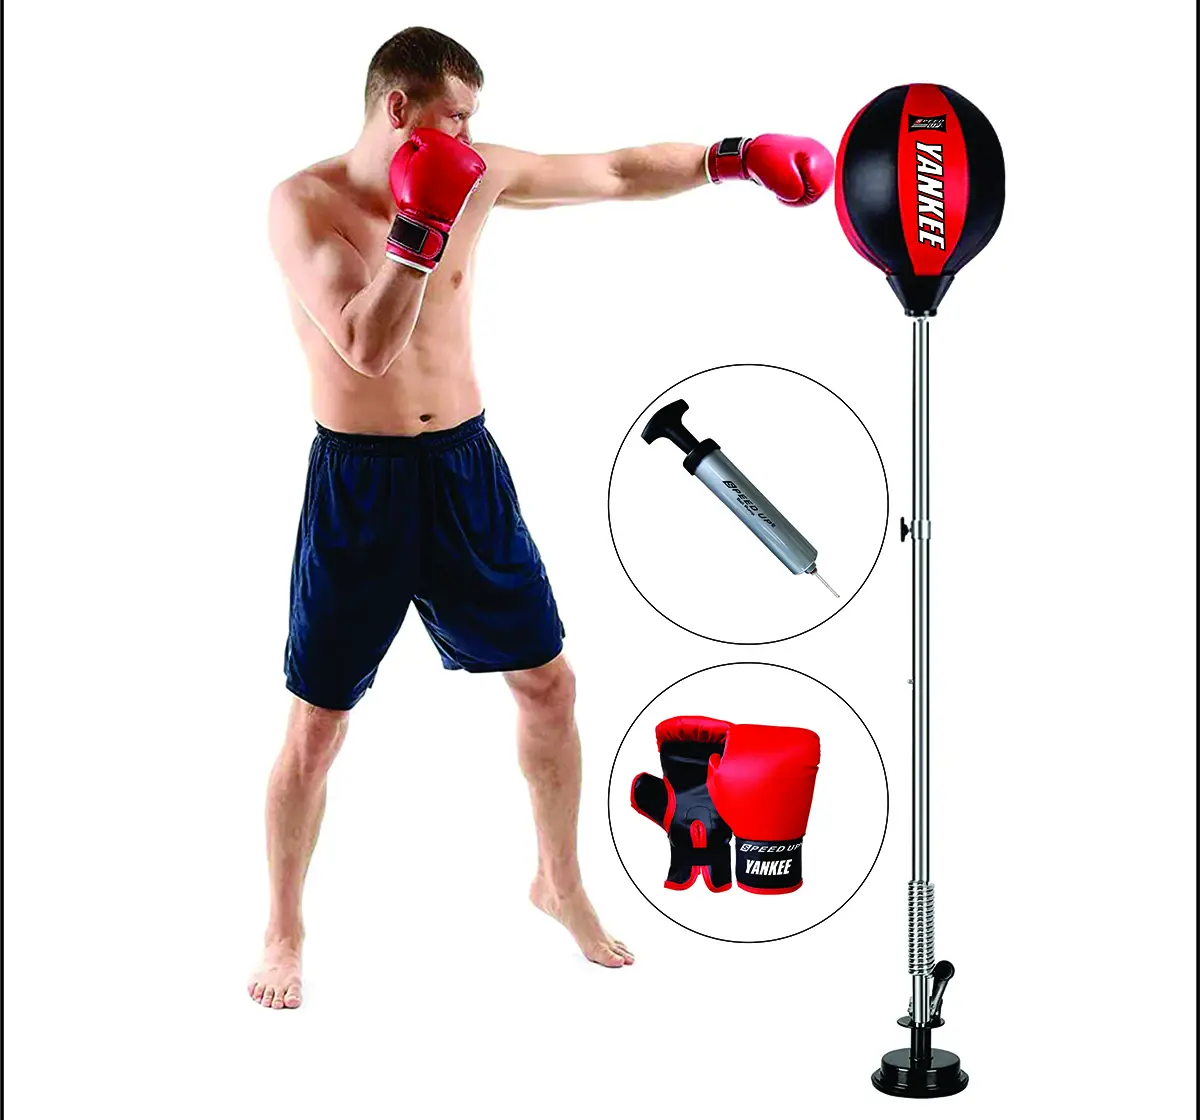 Speed Up Boxing Trainer Kit for Kids 10Y+, multicolour